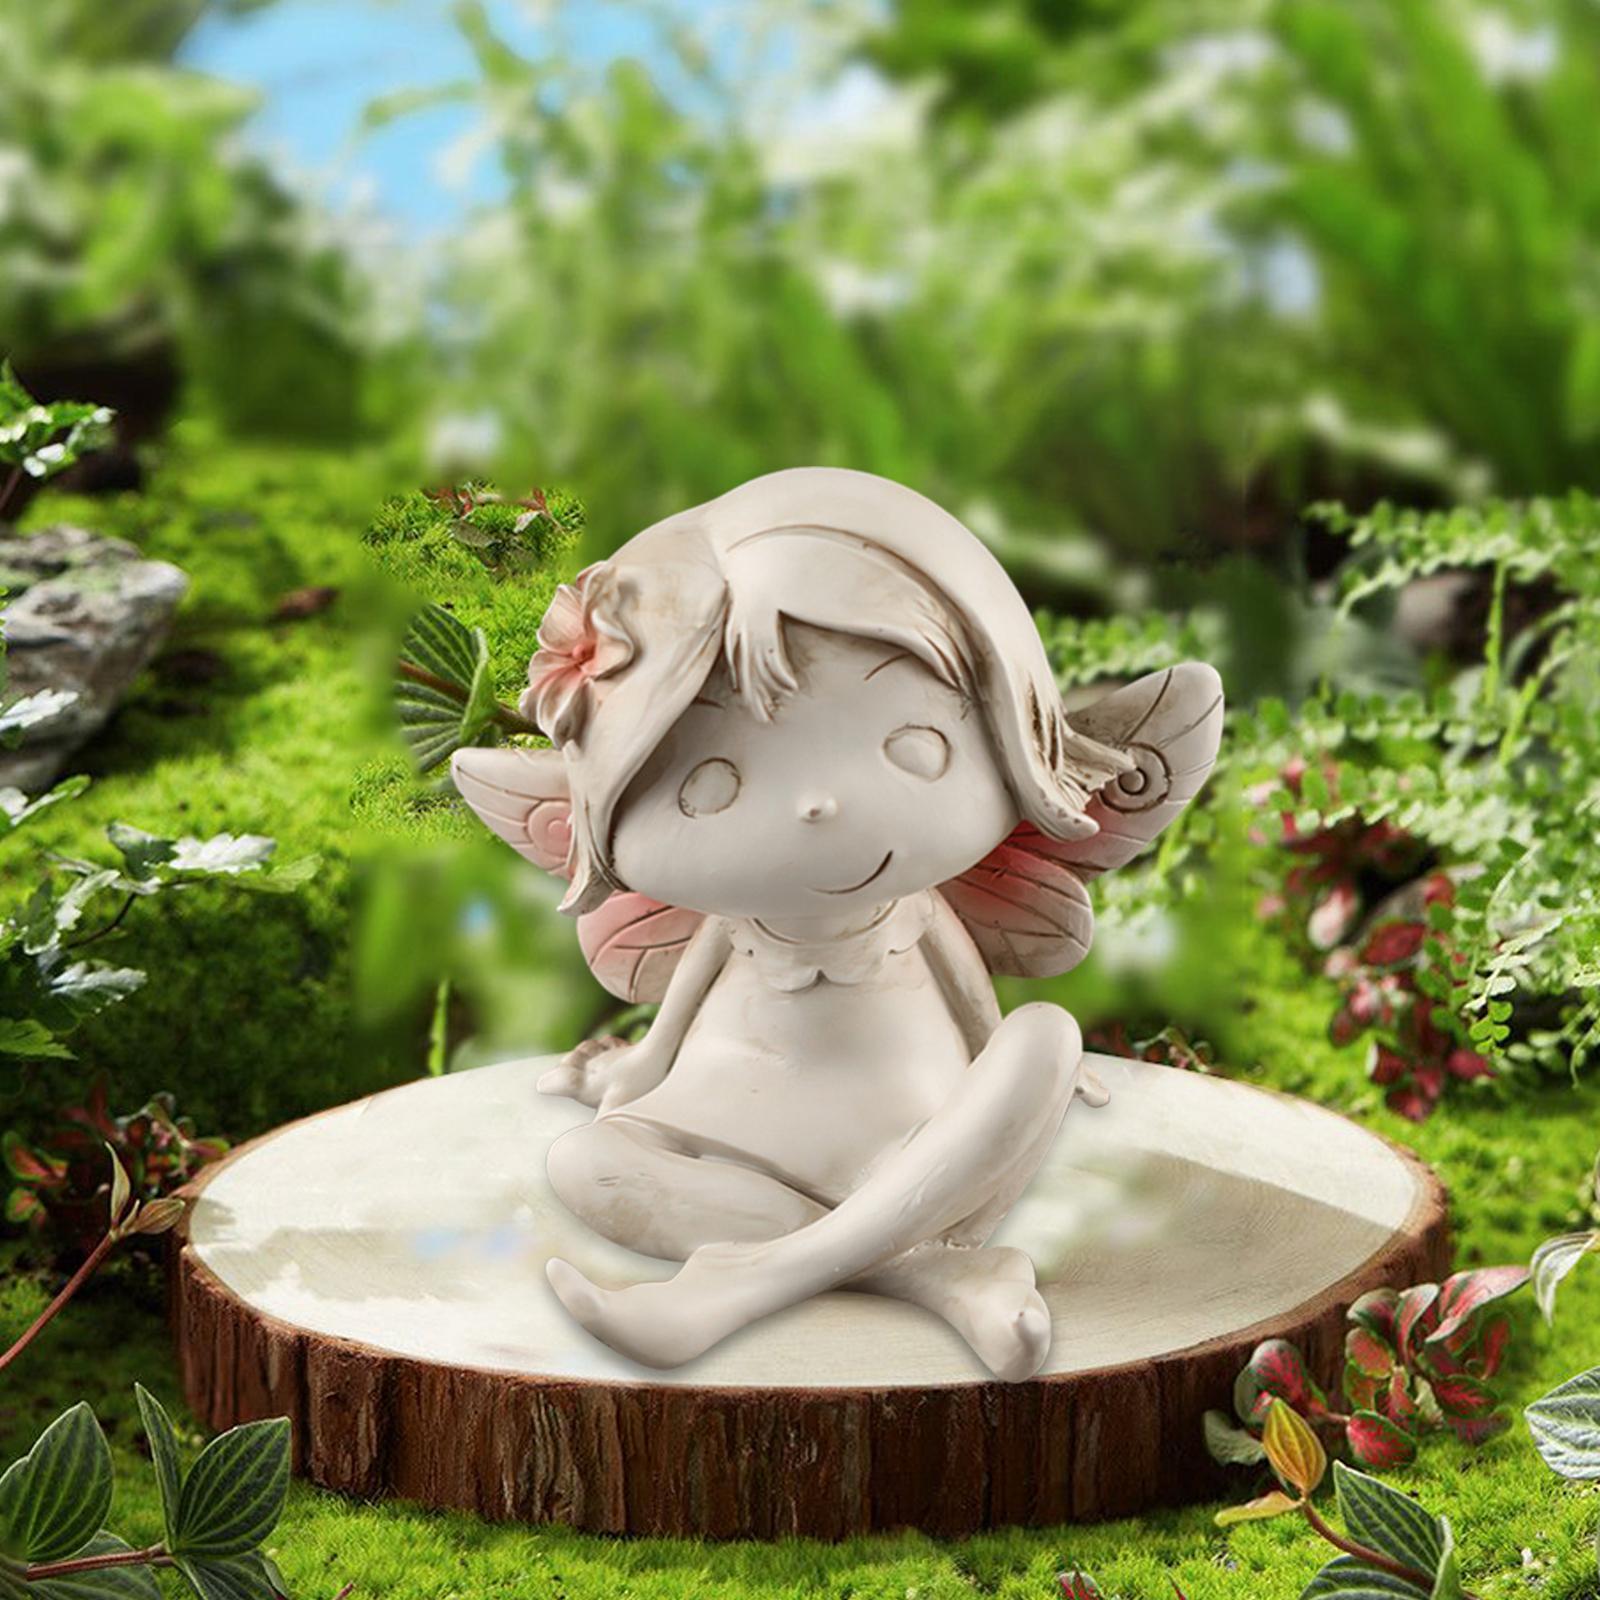 Fairy Girls Statue Figurine Nordic Crafts for Living Room Decor